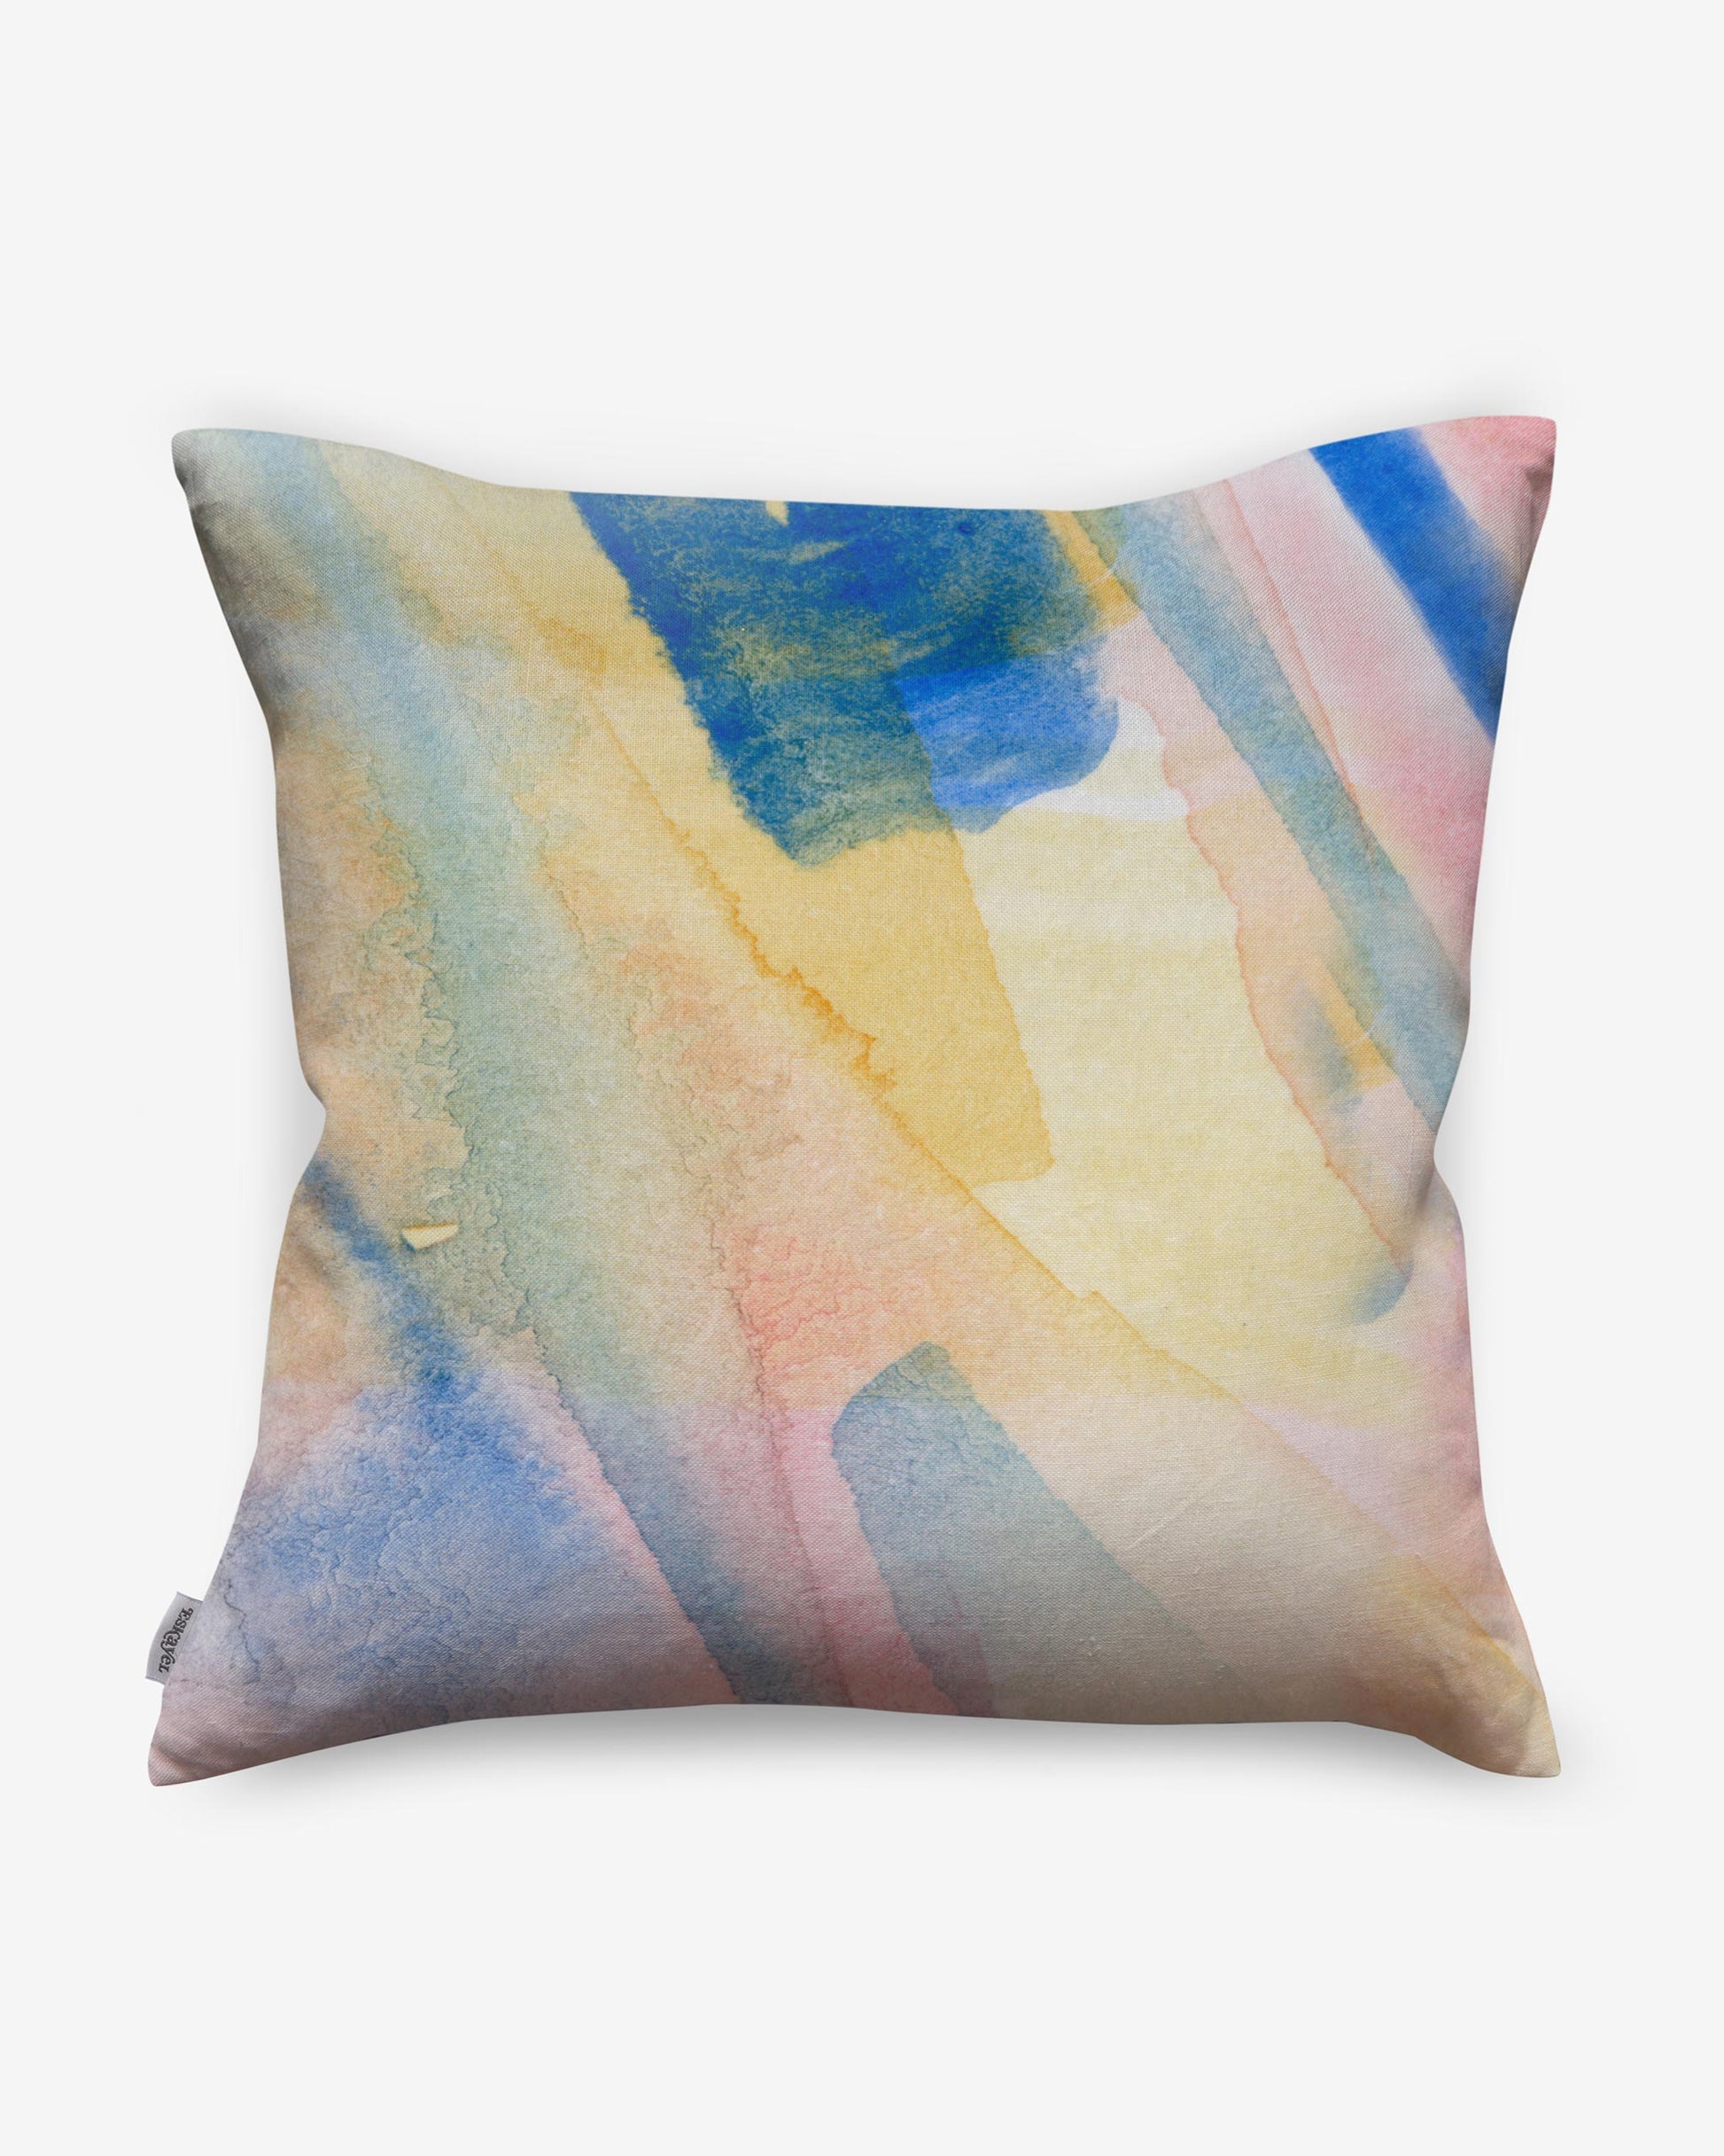 A pillow from Eskayel's Lily's View Pillow||Dawn One Collection with a watercolor painting on it.